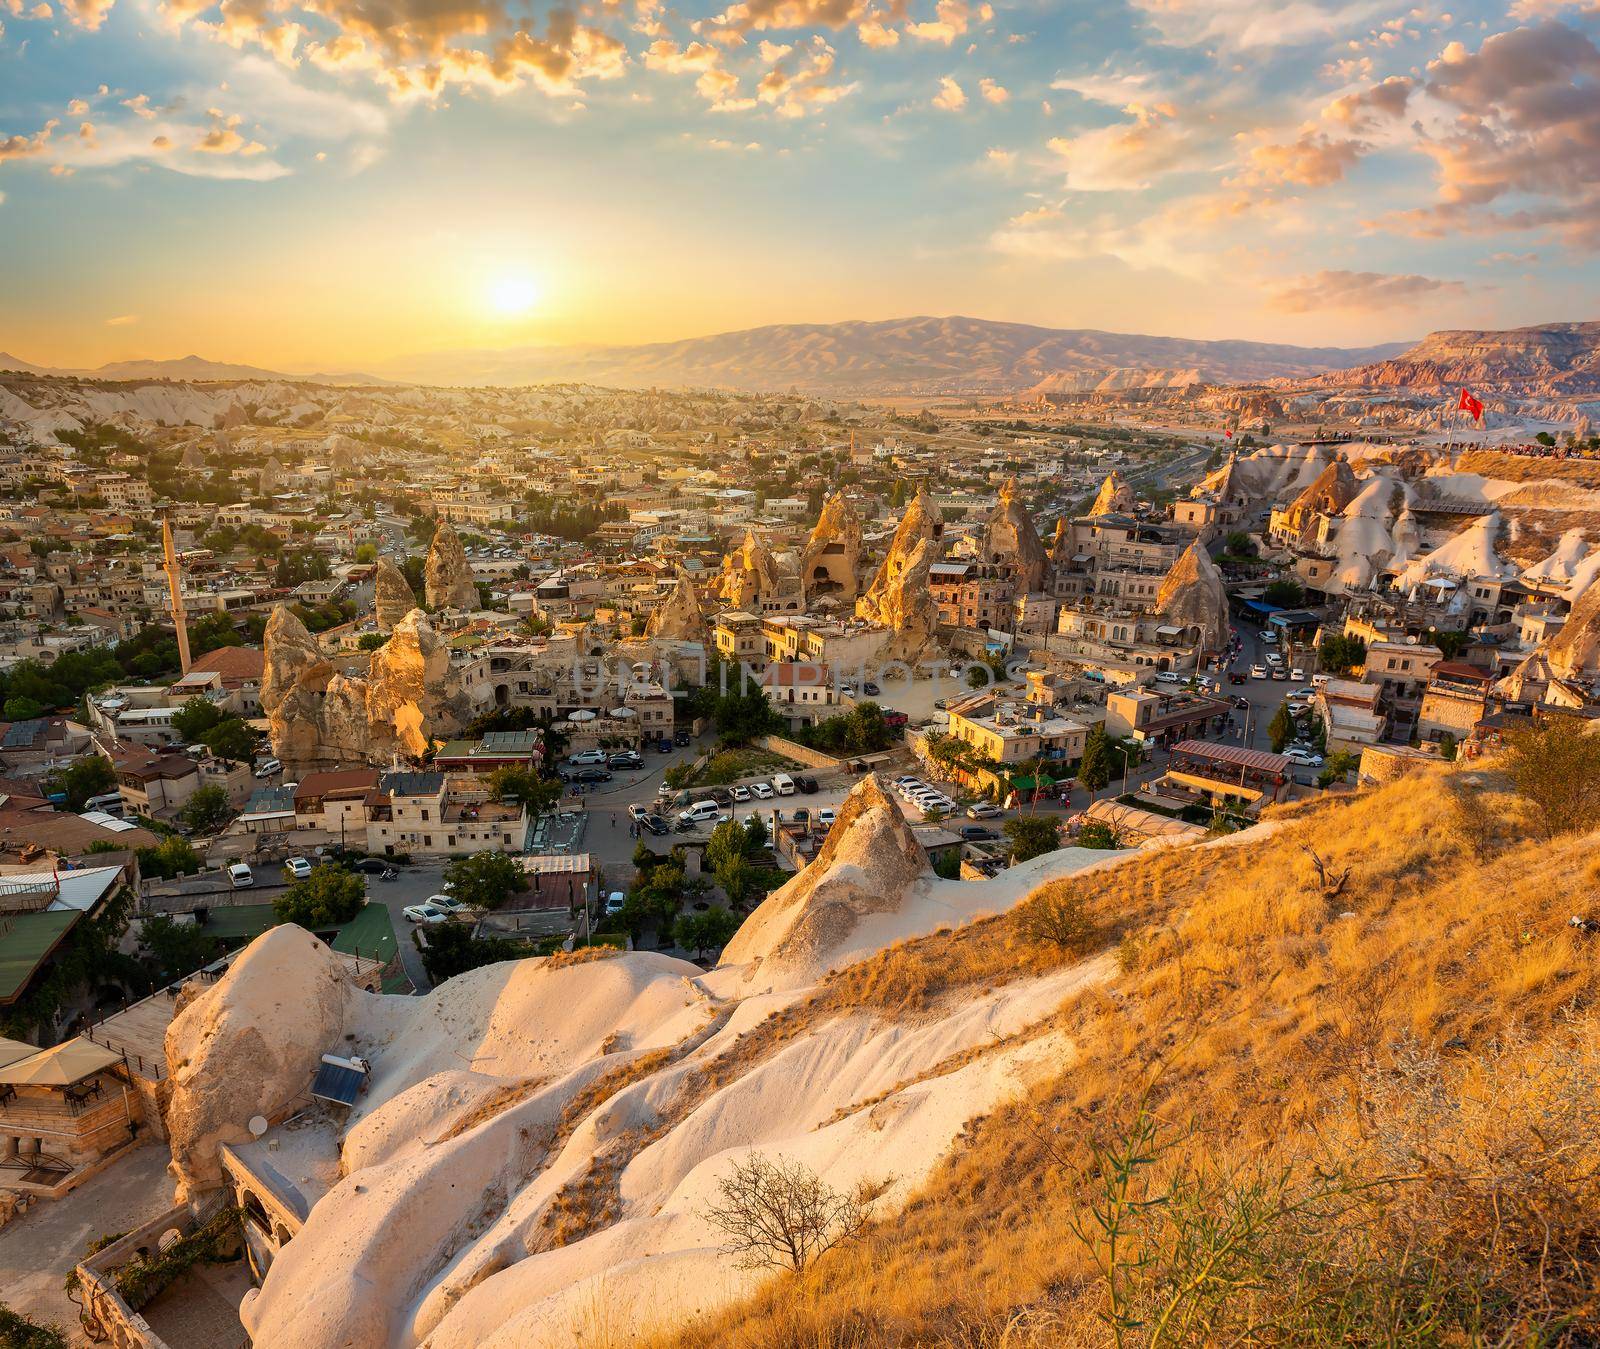 Panoramic view of the town of Goreme, Turkey